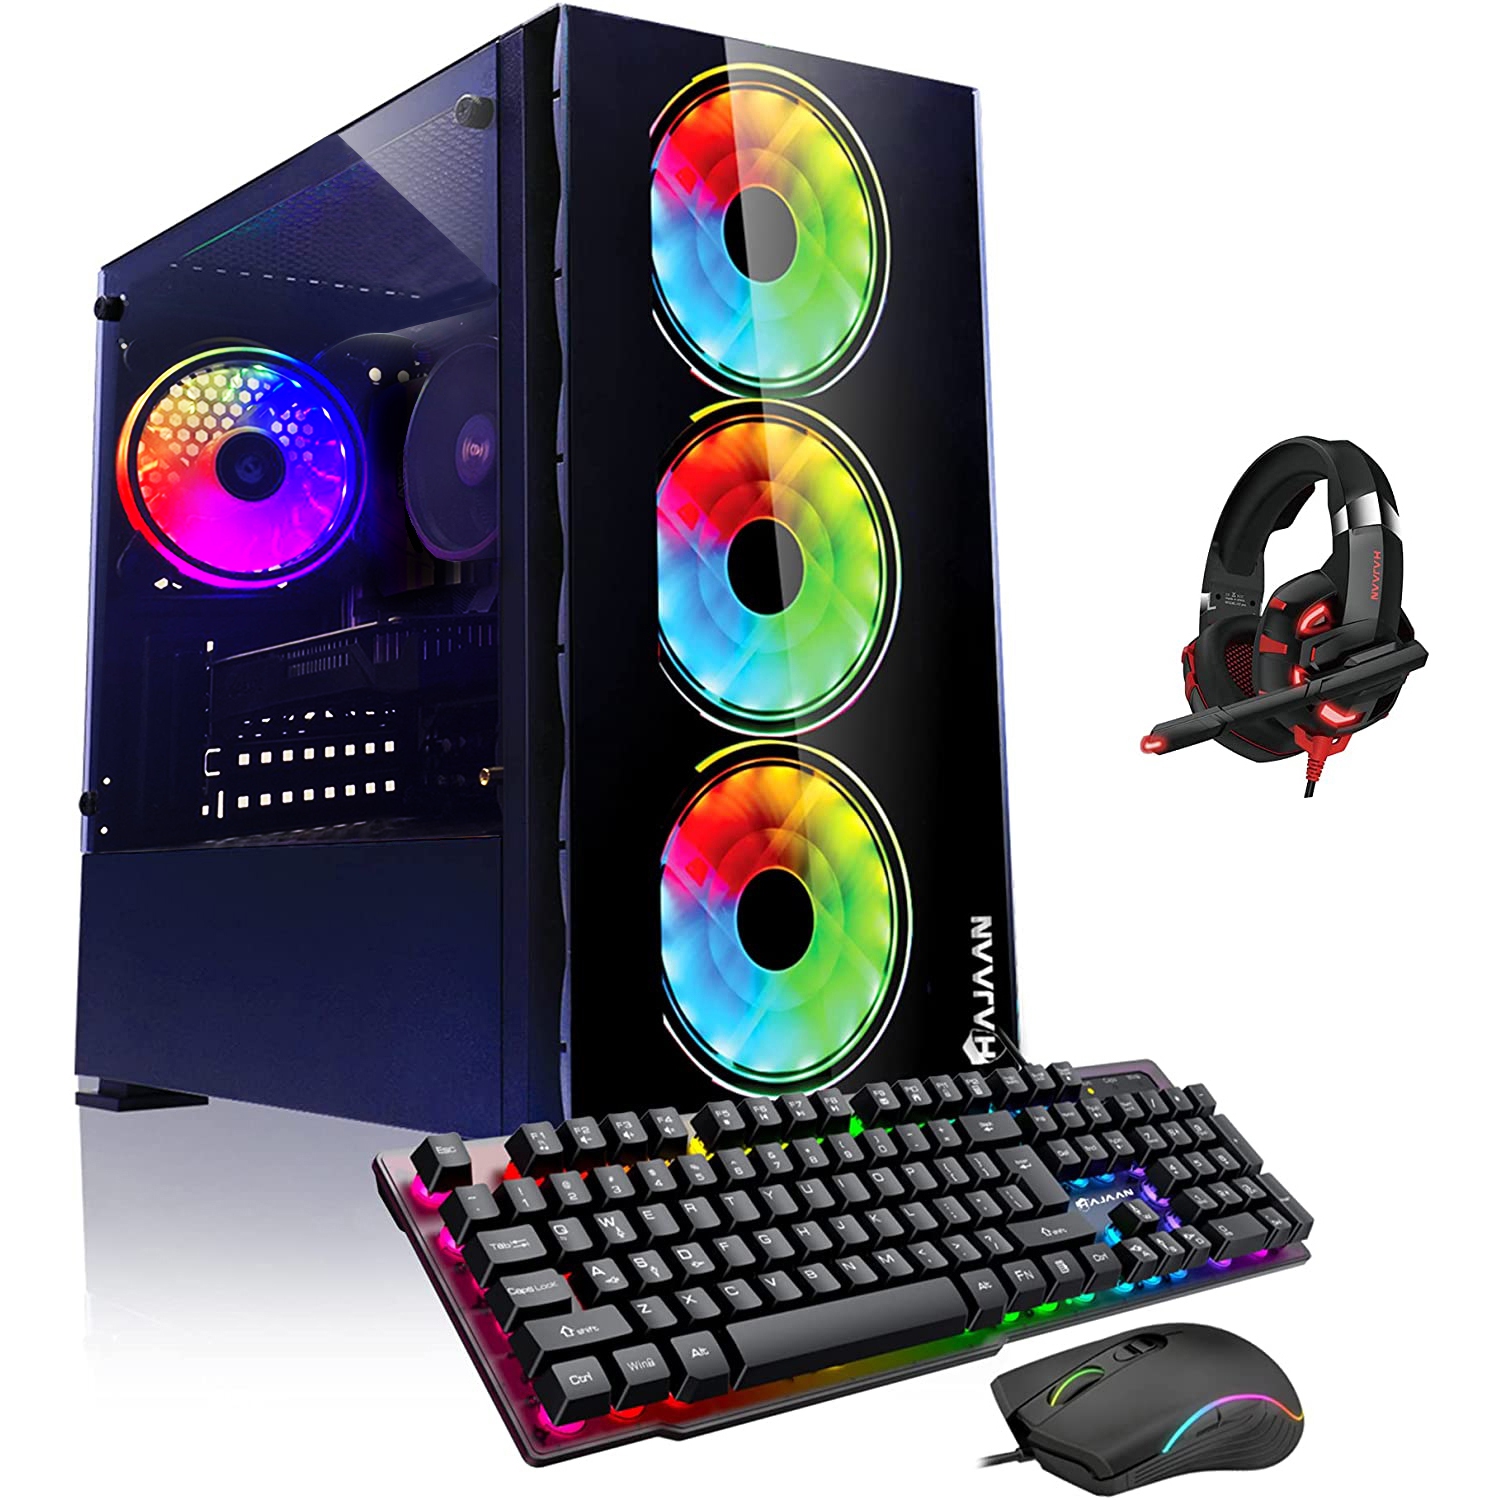 Refurbished (Excellent) Gaming PC Desktop Tower Intel Quad Core i7 up to 4.0GHz 16GB RAM 512GB SSD AMD RX550 4GB HDMI Graphics RGB Keyboard Mouse & Headset Wifi Windows 10 Pro